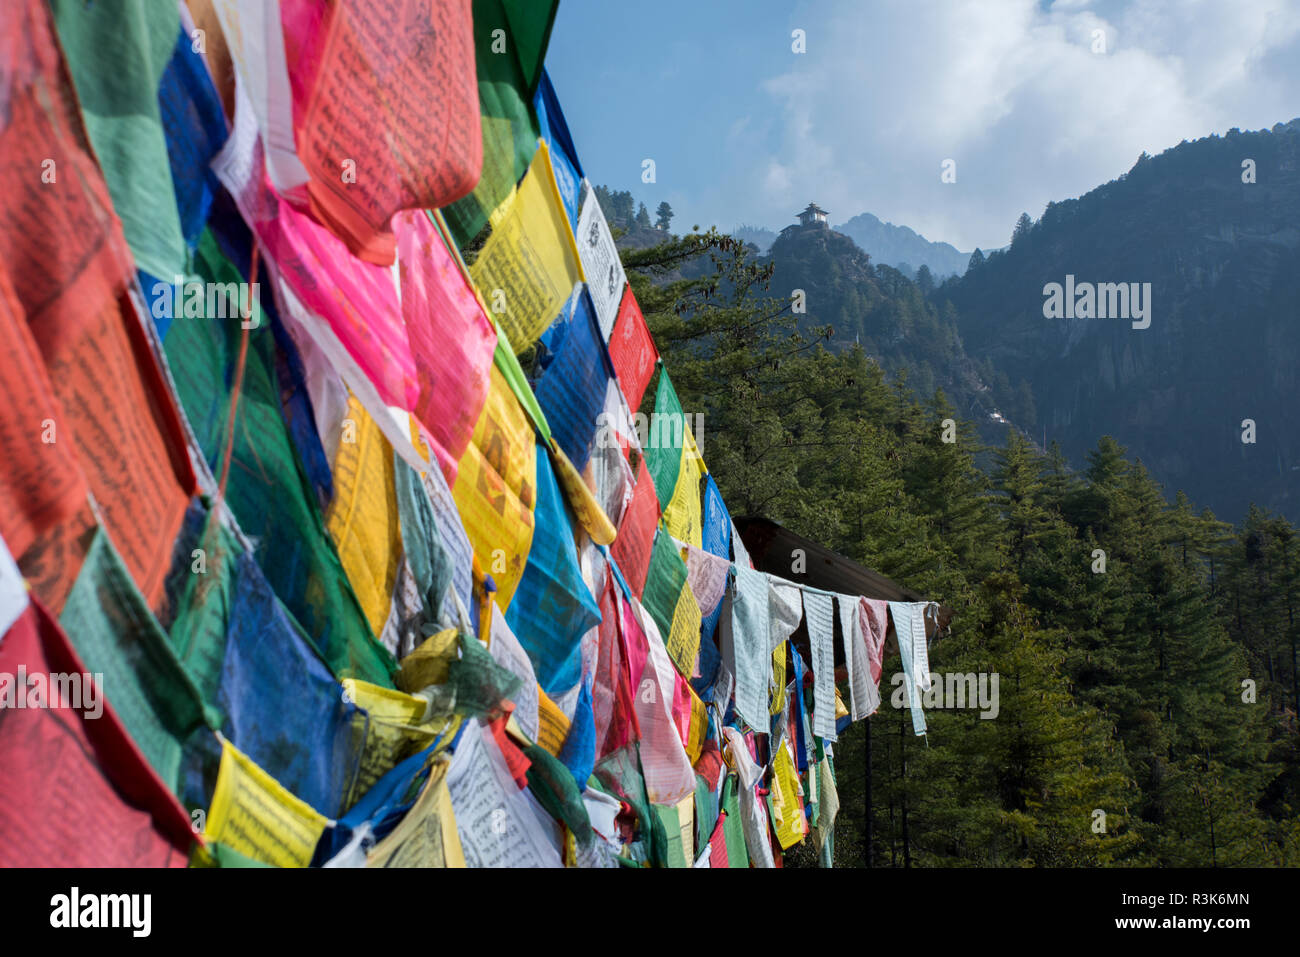 Bhutan, Paro. Colorful prayer flags in front of small outbuilding of the Tiger's Nest, sacred Himalayan Buddhist temple complex. Stock Photo